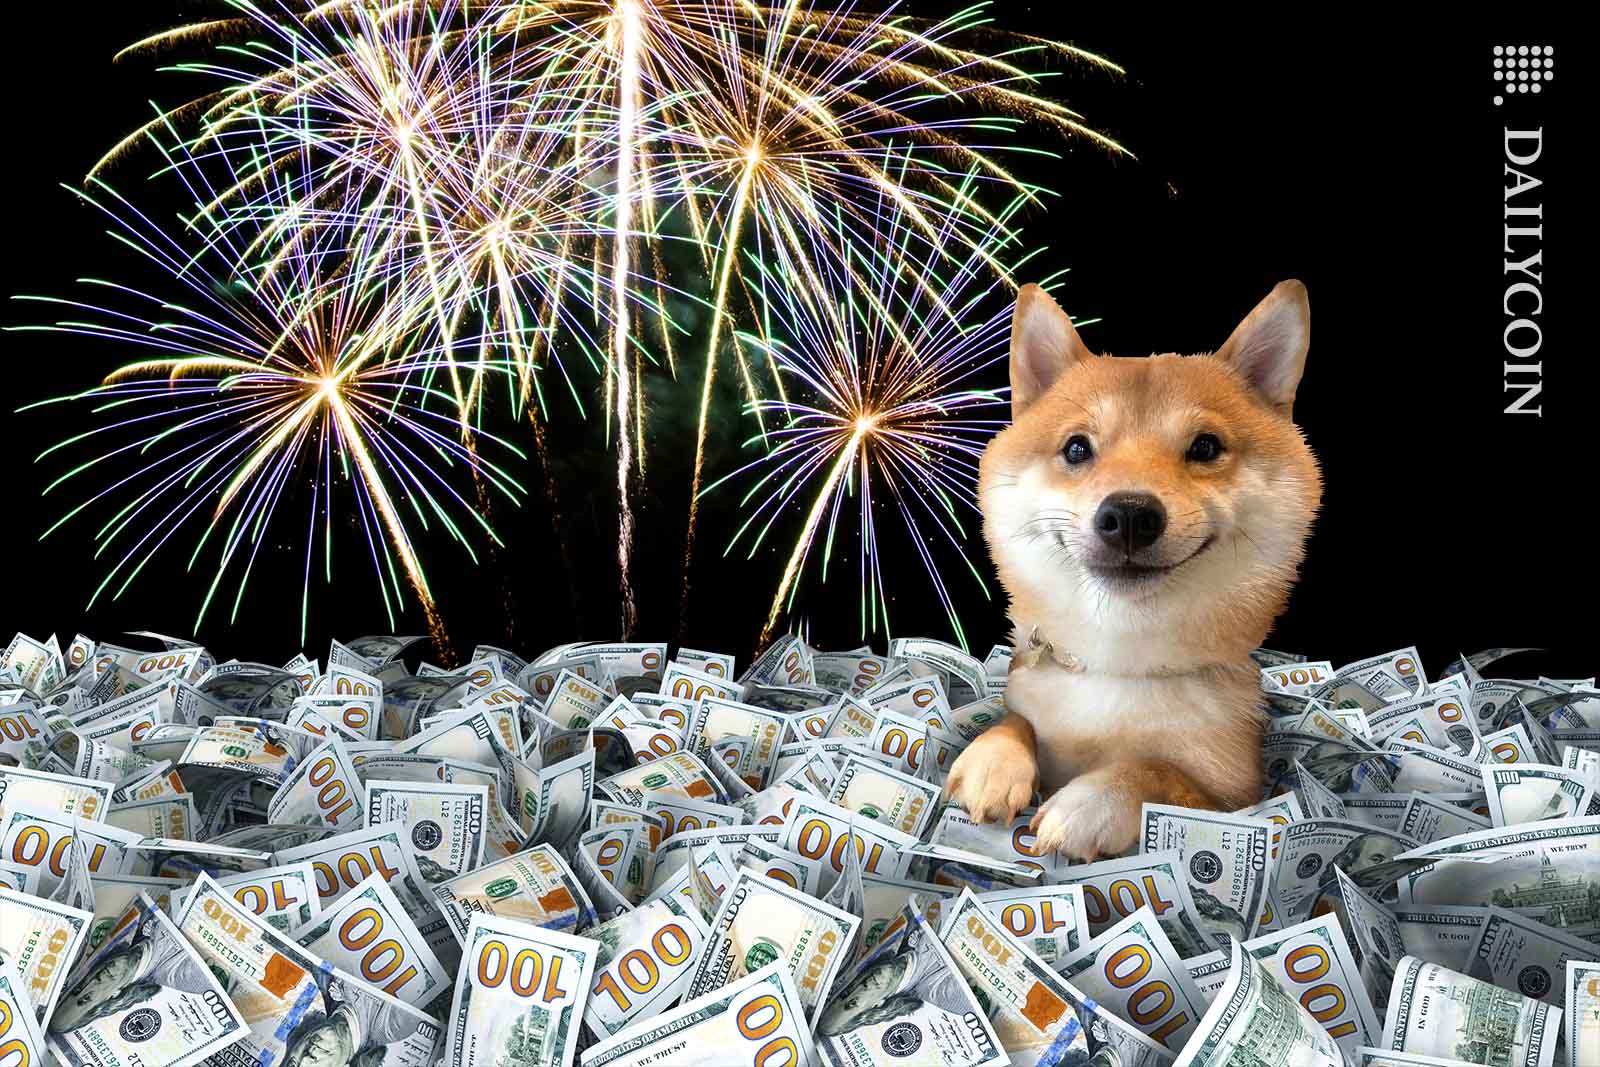 Shiba inu puppy swimming in money with fireworks in the background.